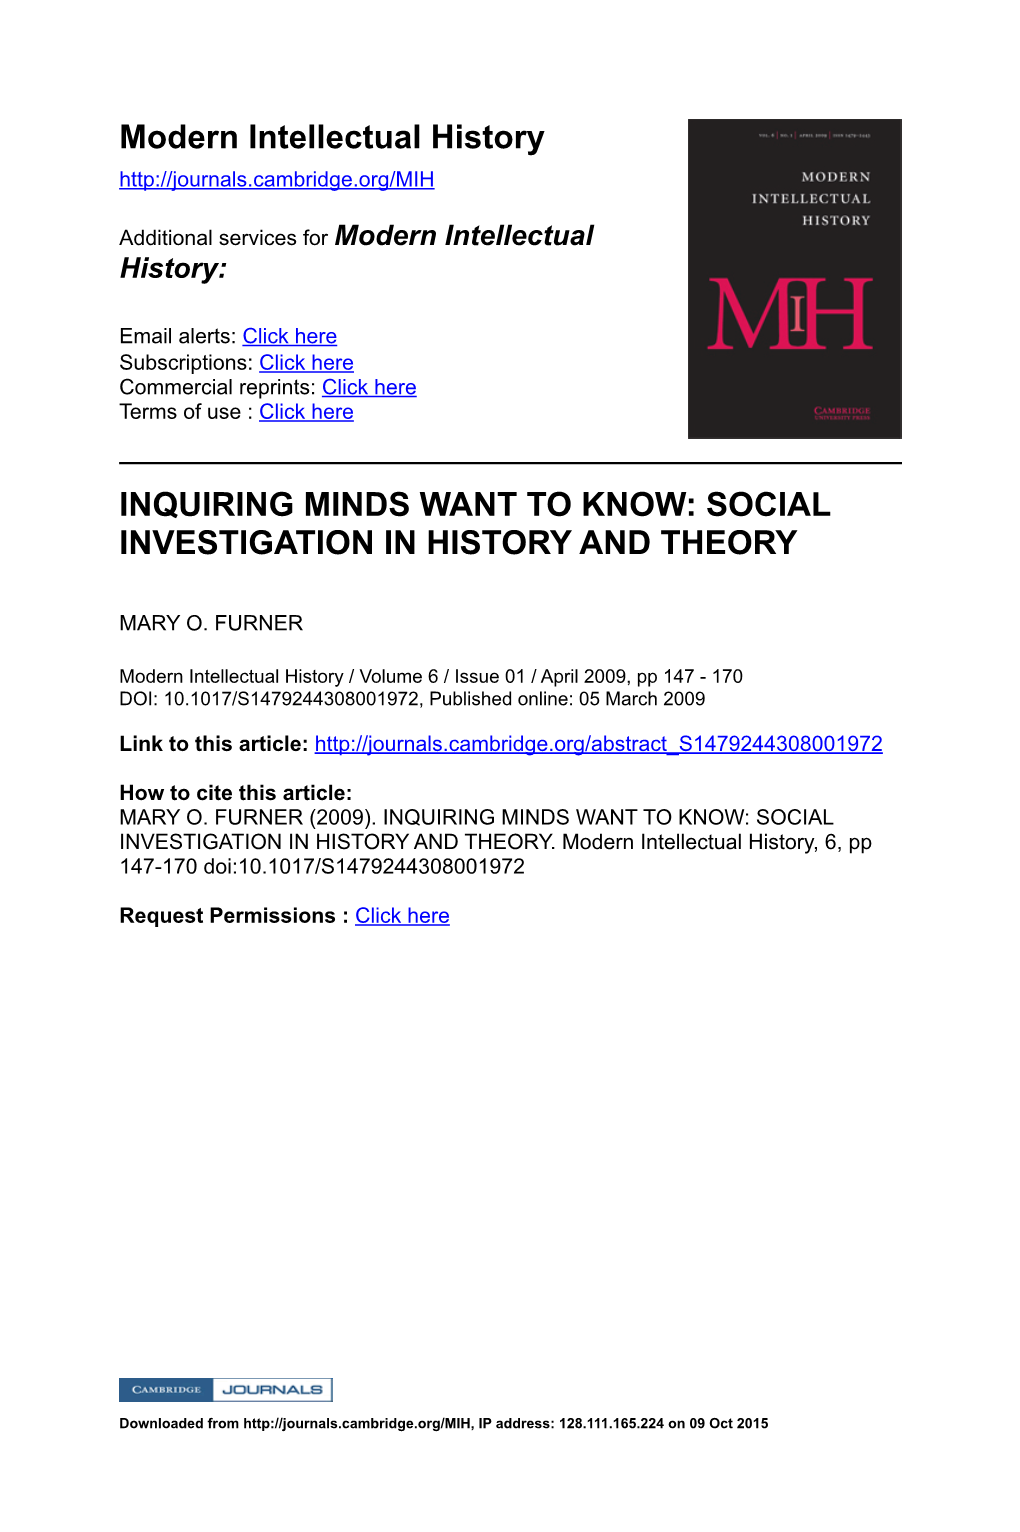 Inquiring Minds Want to Know: Social Investigation in History and Theory